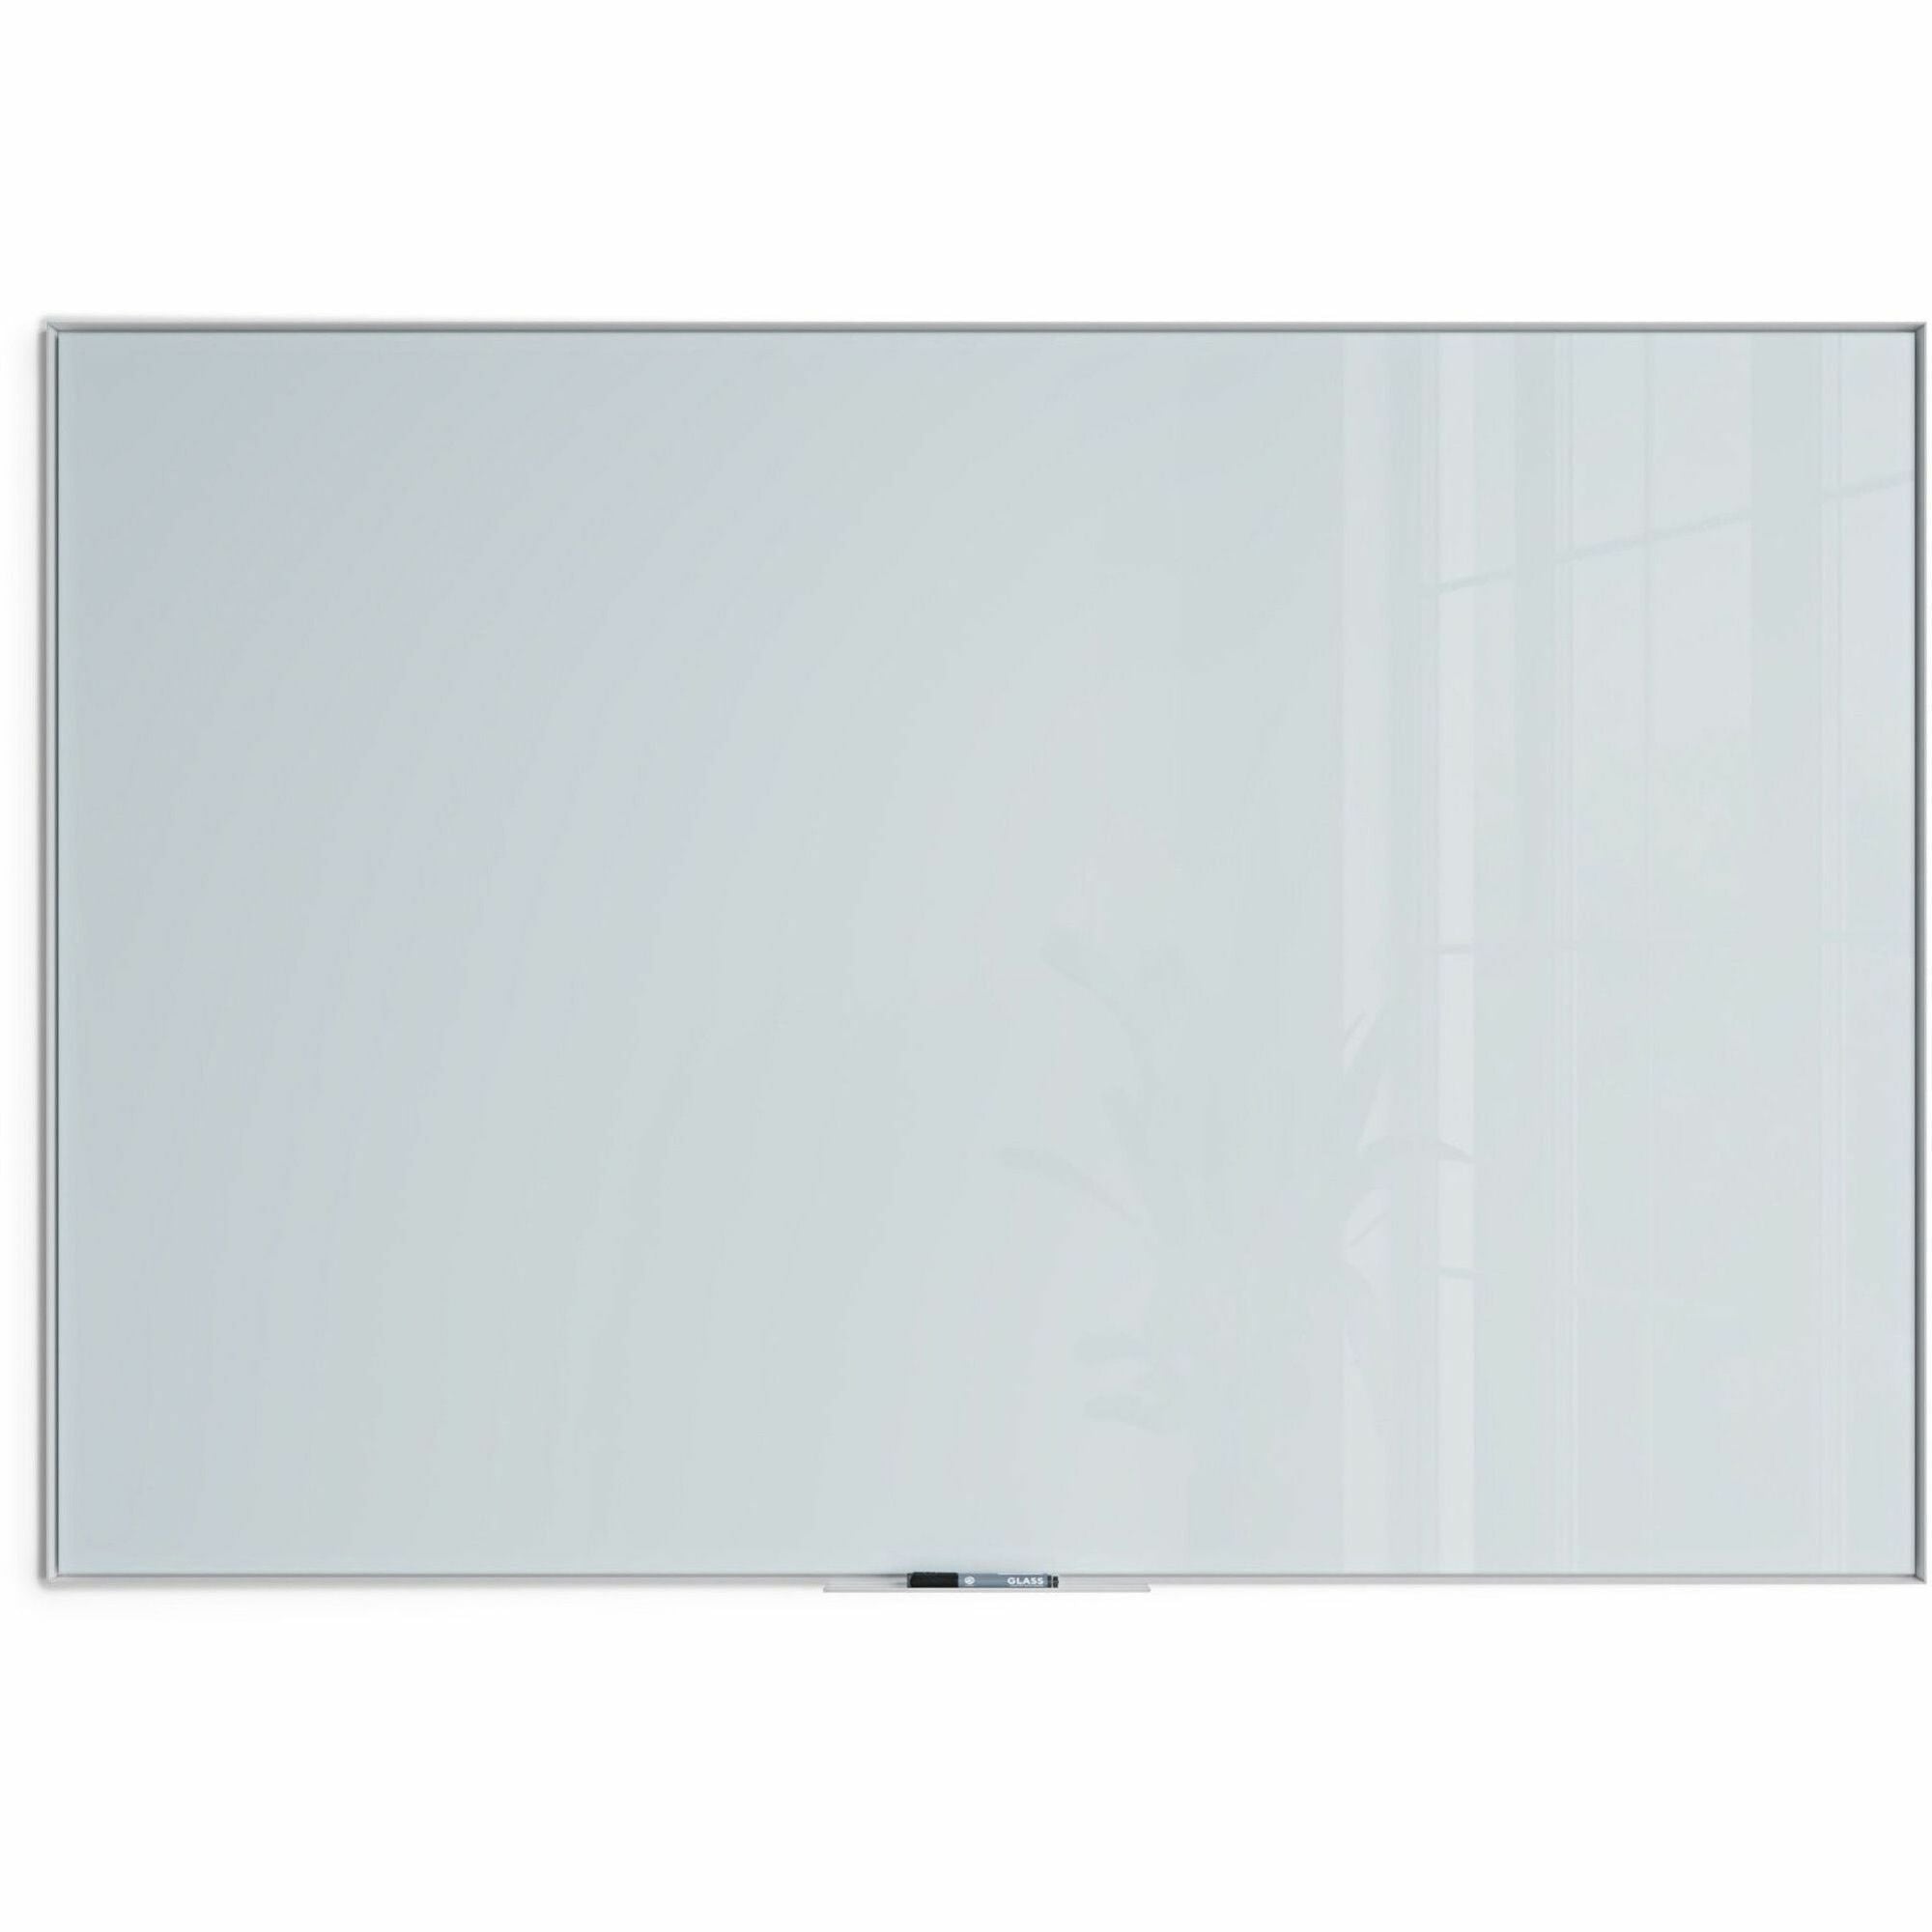 u-brands-glass-dry-erase-board-47-39-ft-width-x-70-58-ft-height-frosted-white-tempered-glass-surface-white-aluminum-frame-rectangle-horizontal-vertical-1-each_ubr2827u0001 - 1